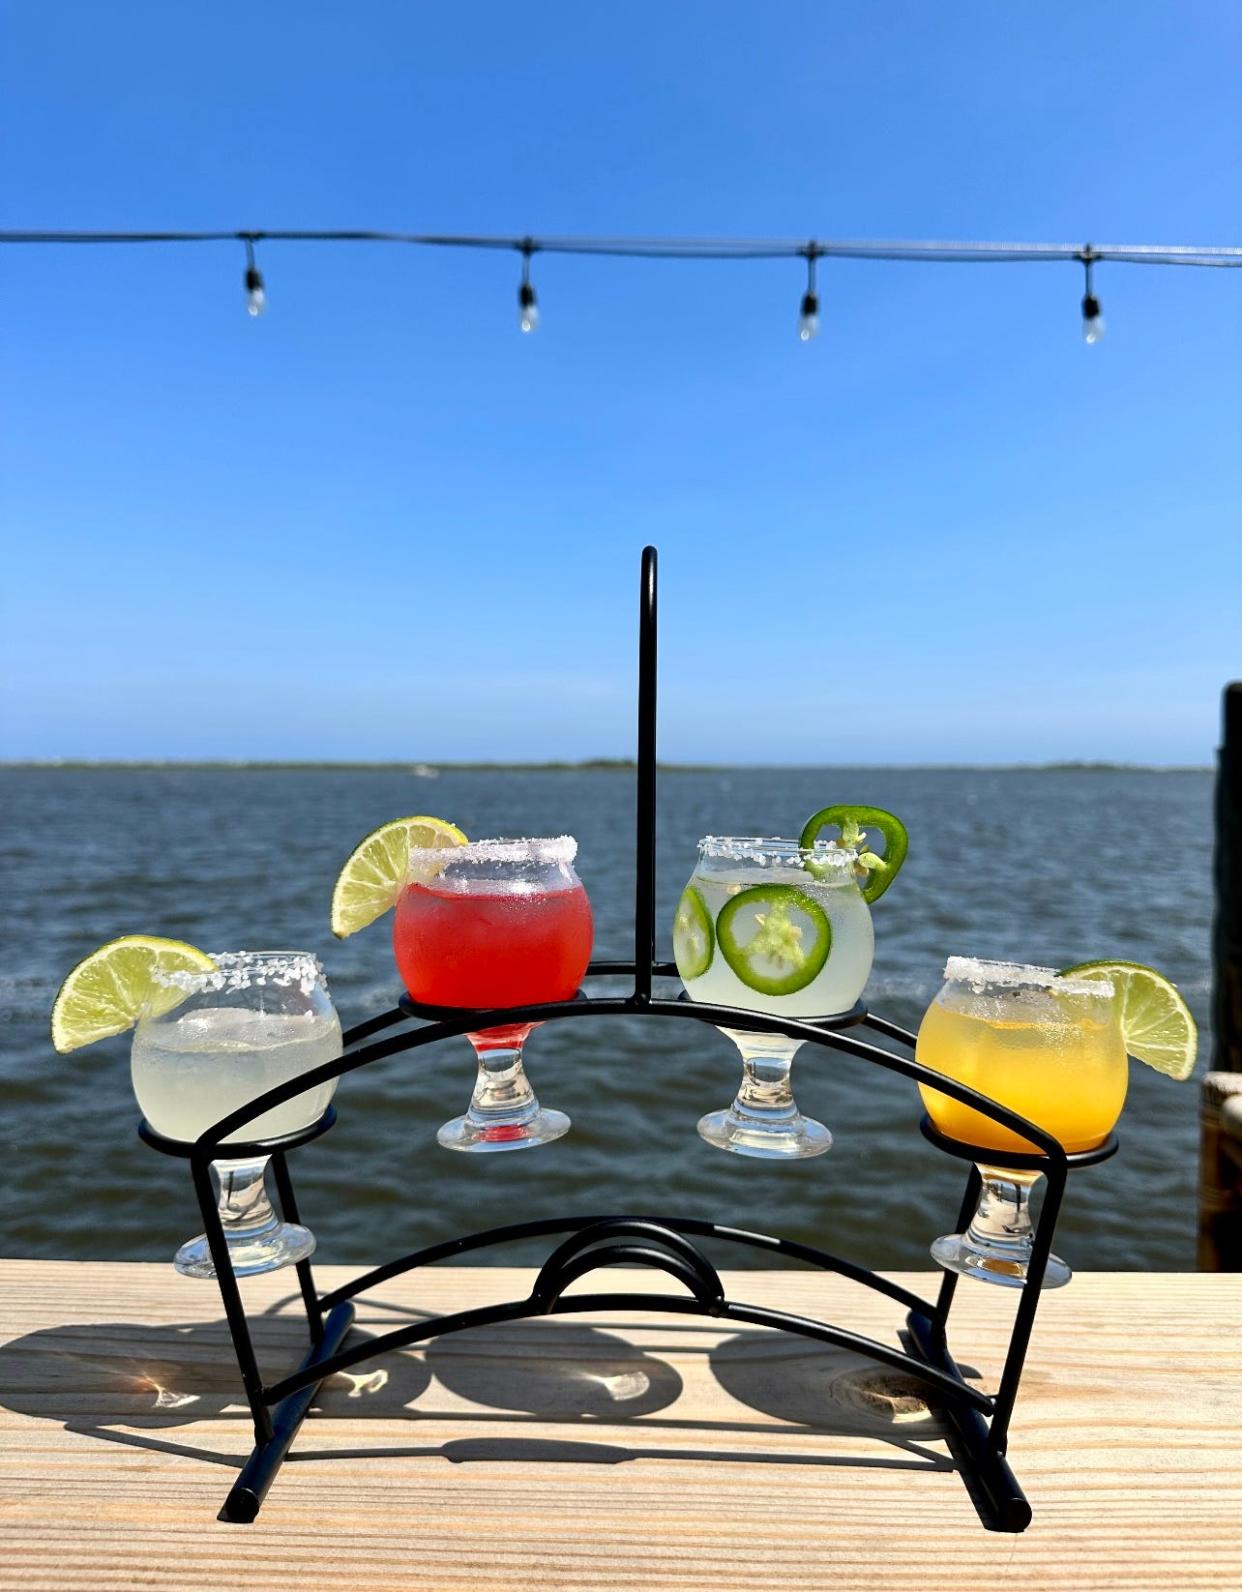 A flight of margaritas featuring (left to right) regular, strawberry, spicy jalapeno and mango from Sun Harbor Seafood and Grill.